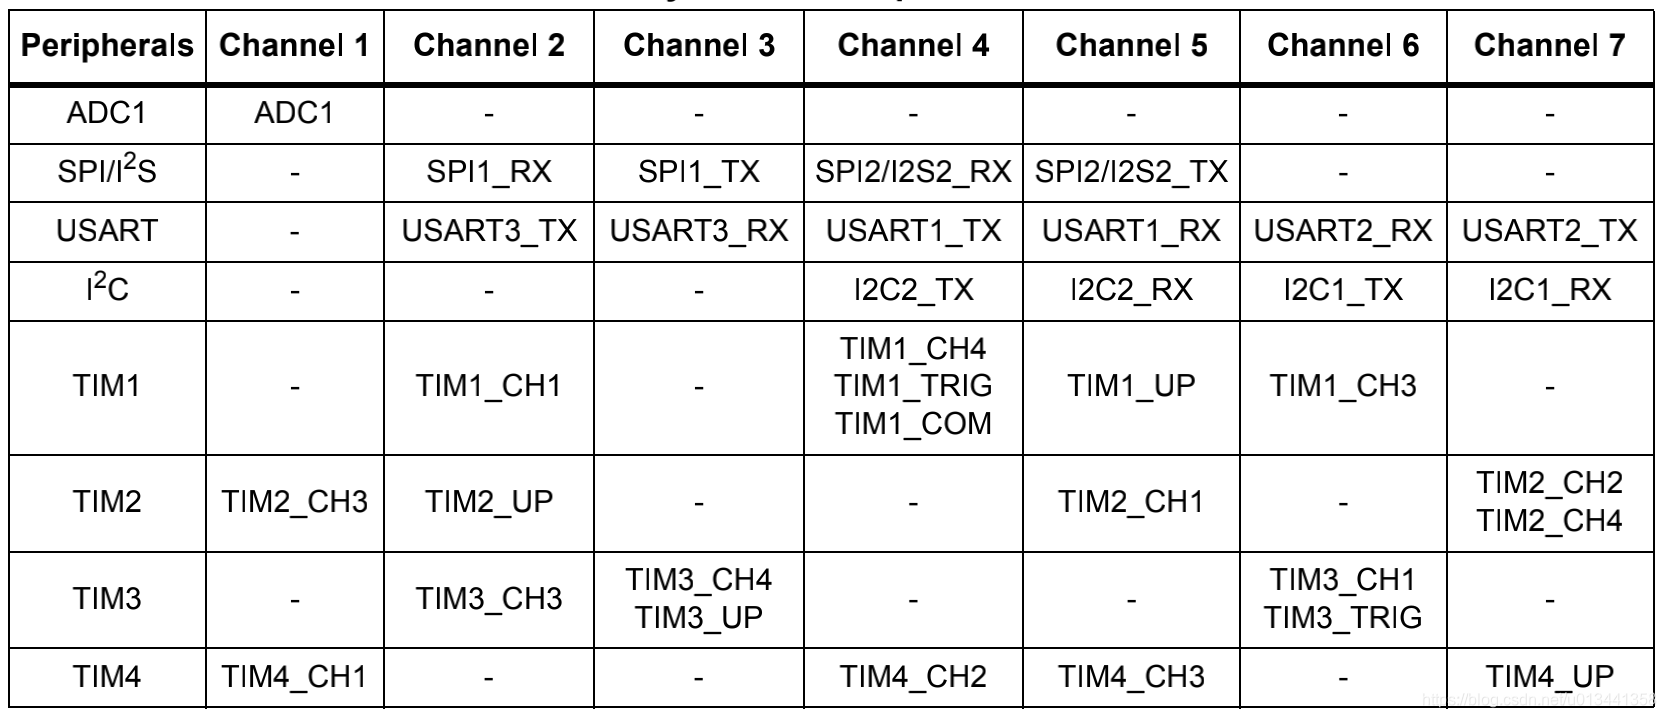 Summary of DMA1 requests for each channel